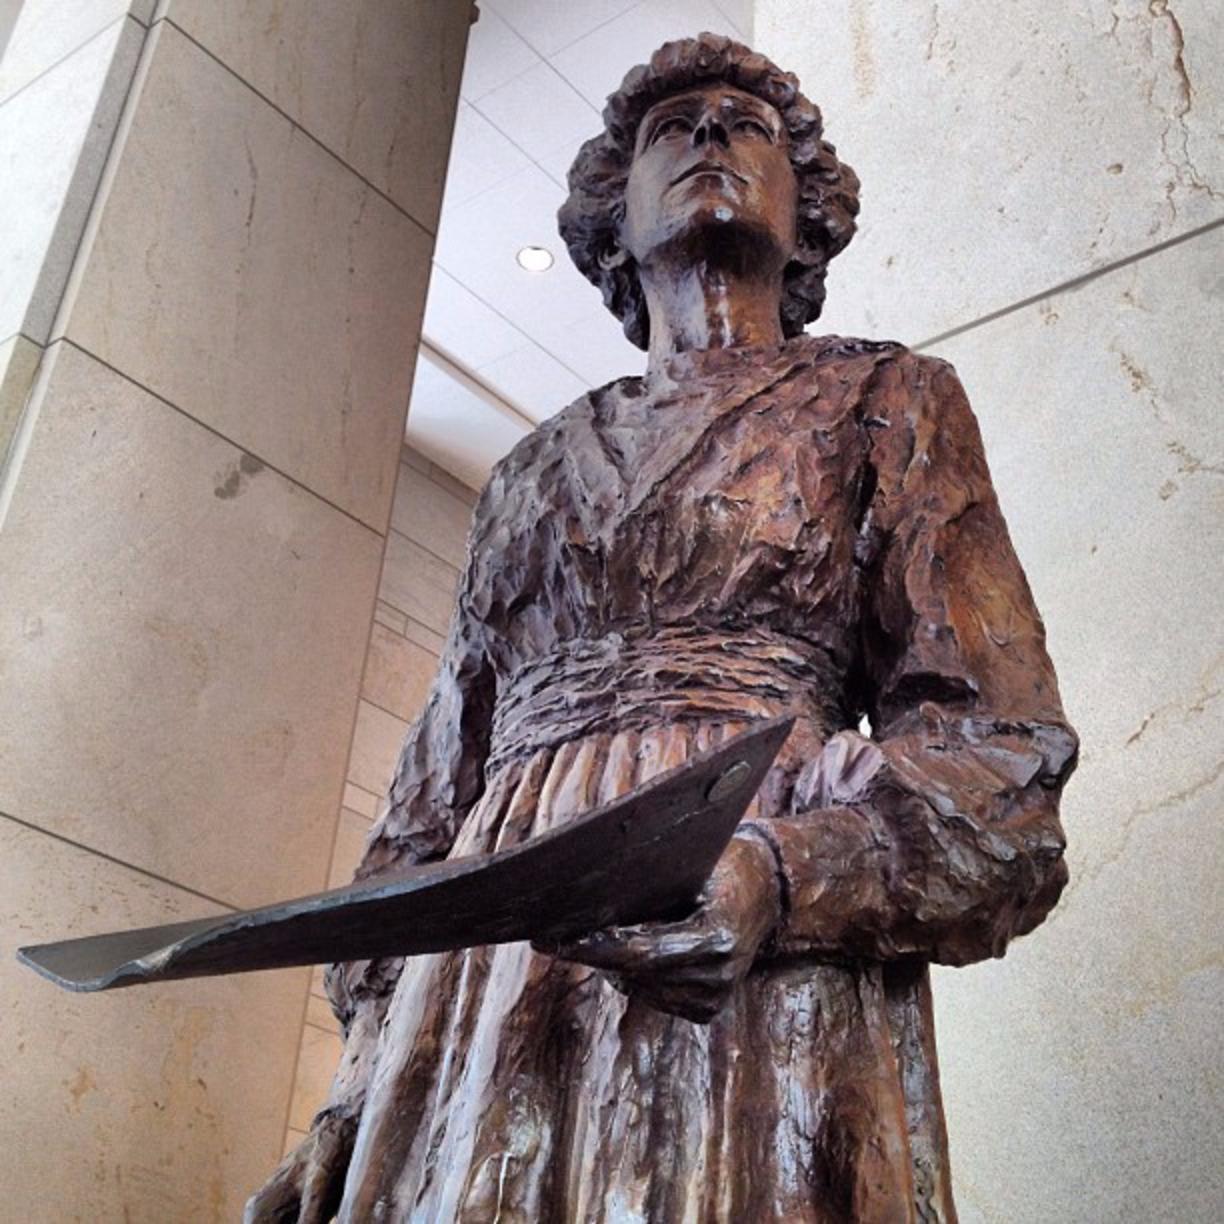 A statue of Jeannette Rankin adorns the US Capitol along with those of other major political figures in US history. Rankin, a progressive Republican from Montana, was the first woman in America elected to the US House of Representatives. No other Montana woman has been elected to service in the House or Senate since Rankin left in January 1943. She was succeeded by Mike Mansfield.  Photo courtesy US Capitol/NPS